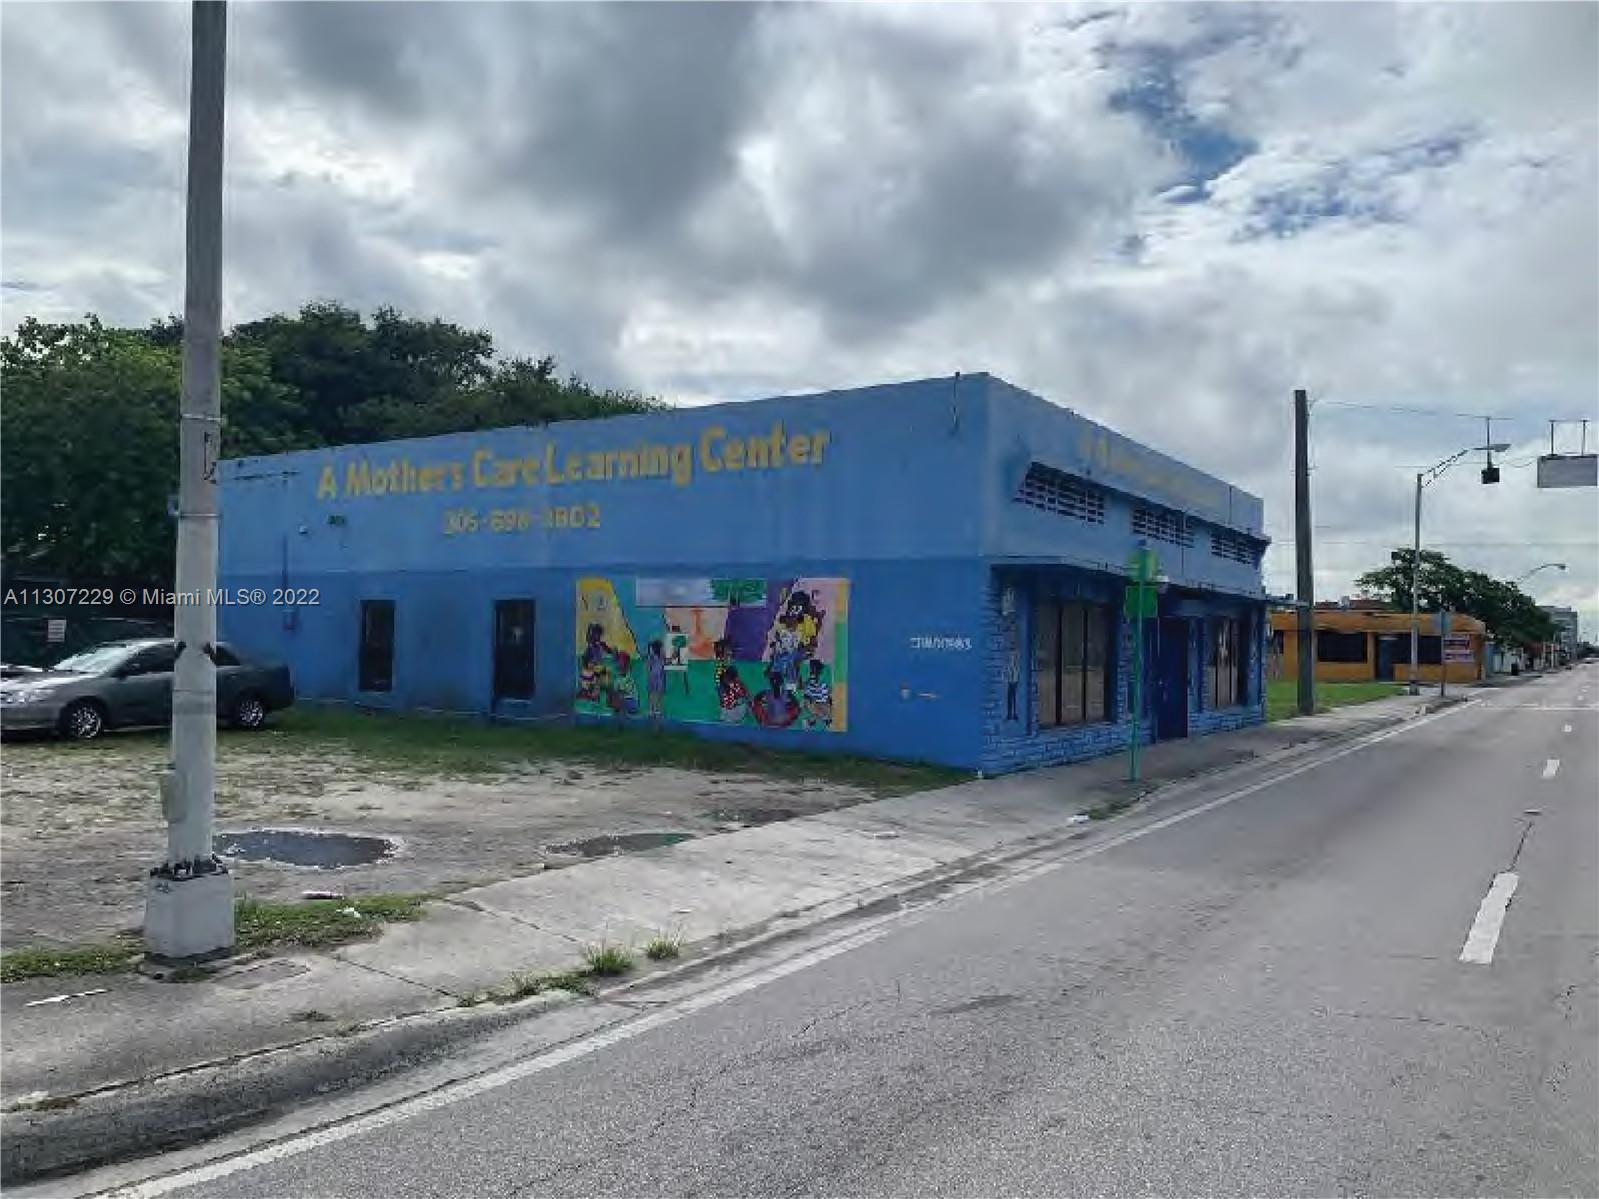 Primary Building from the North side.  This empty parcel to the North belongs to City of Miami.